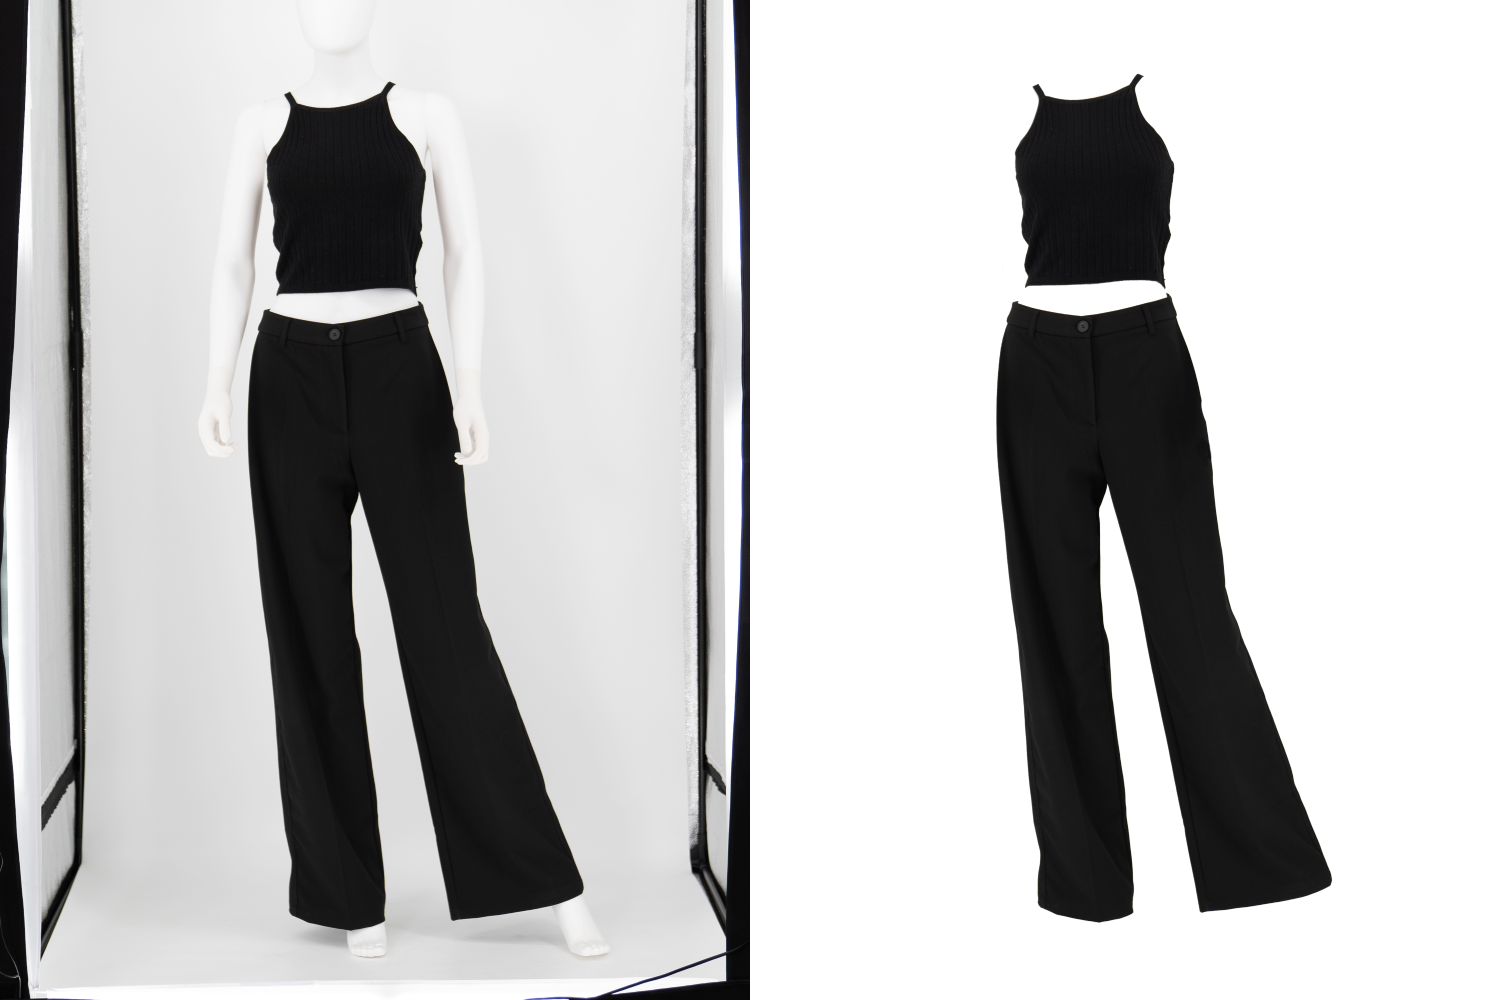 "Collage featuring two images. On the left side, a mannequin dressed in a black halter top and trousers, showcasing the outfit in a stylish manner. On the right side, an edited version of the image where the mannequin has been digitally removed, leaving only the black halter top and trousers suspended in mid-air.